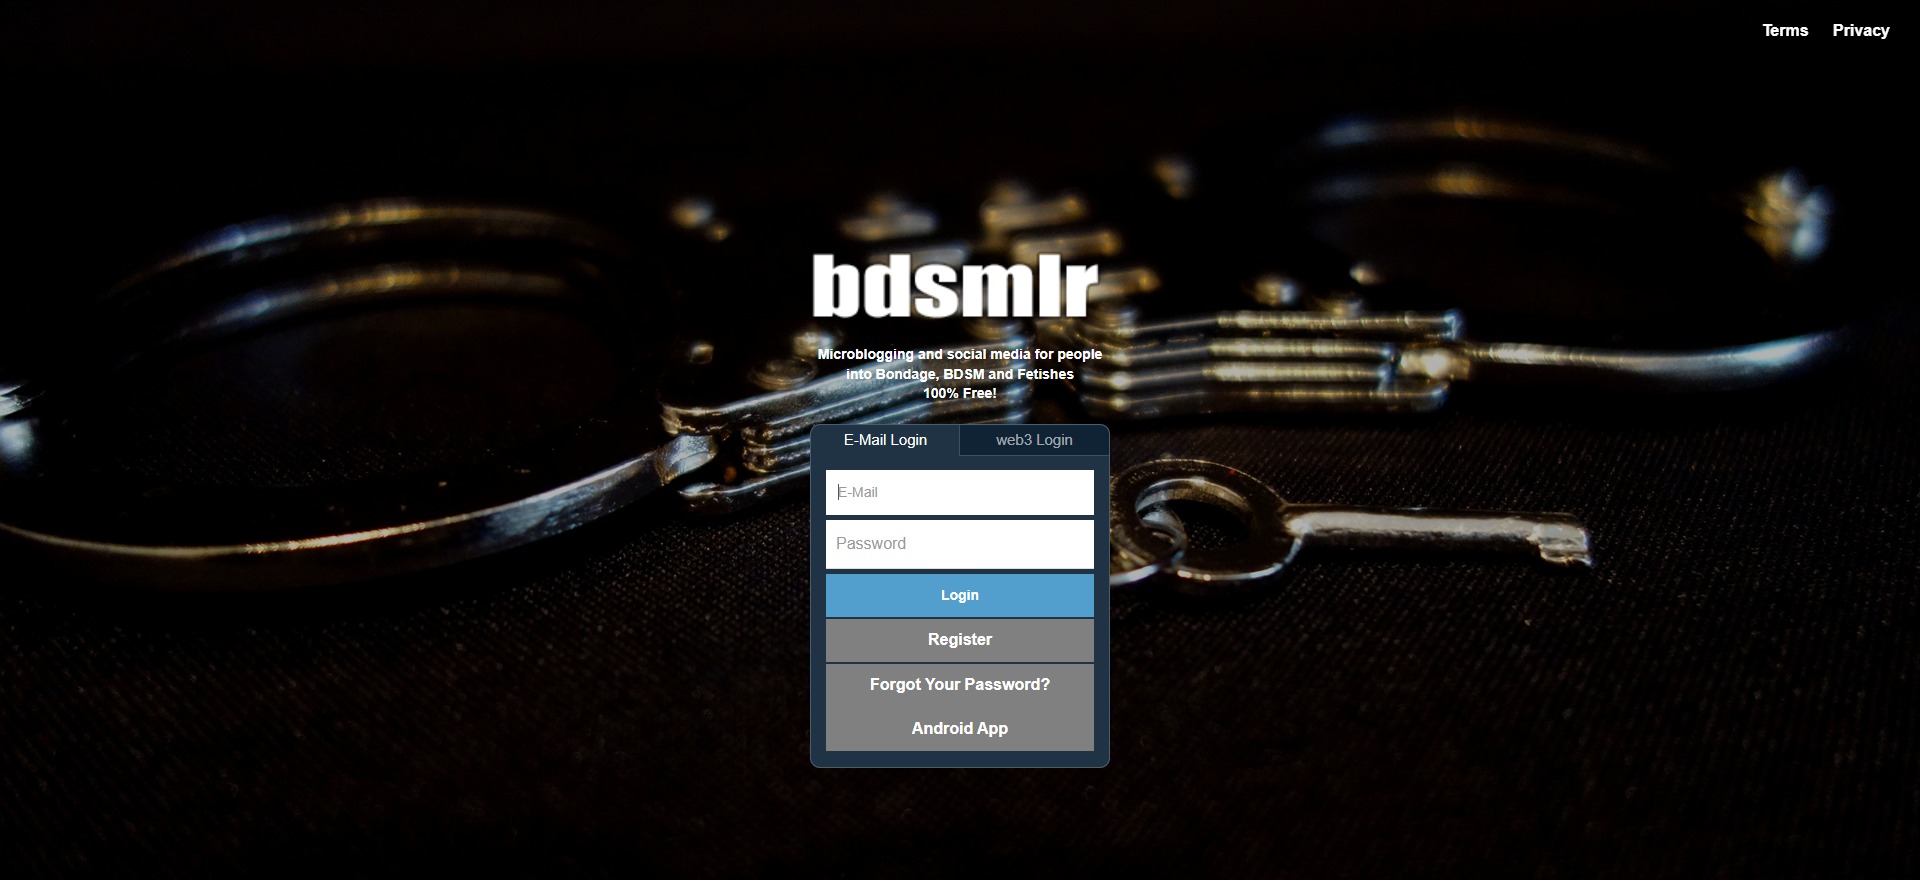 Bdsmlr: Everything You Need to Know